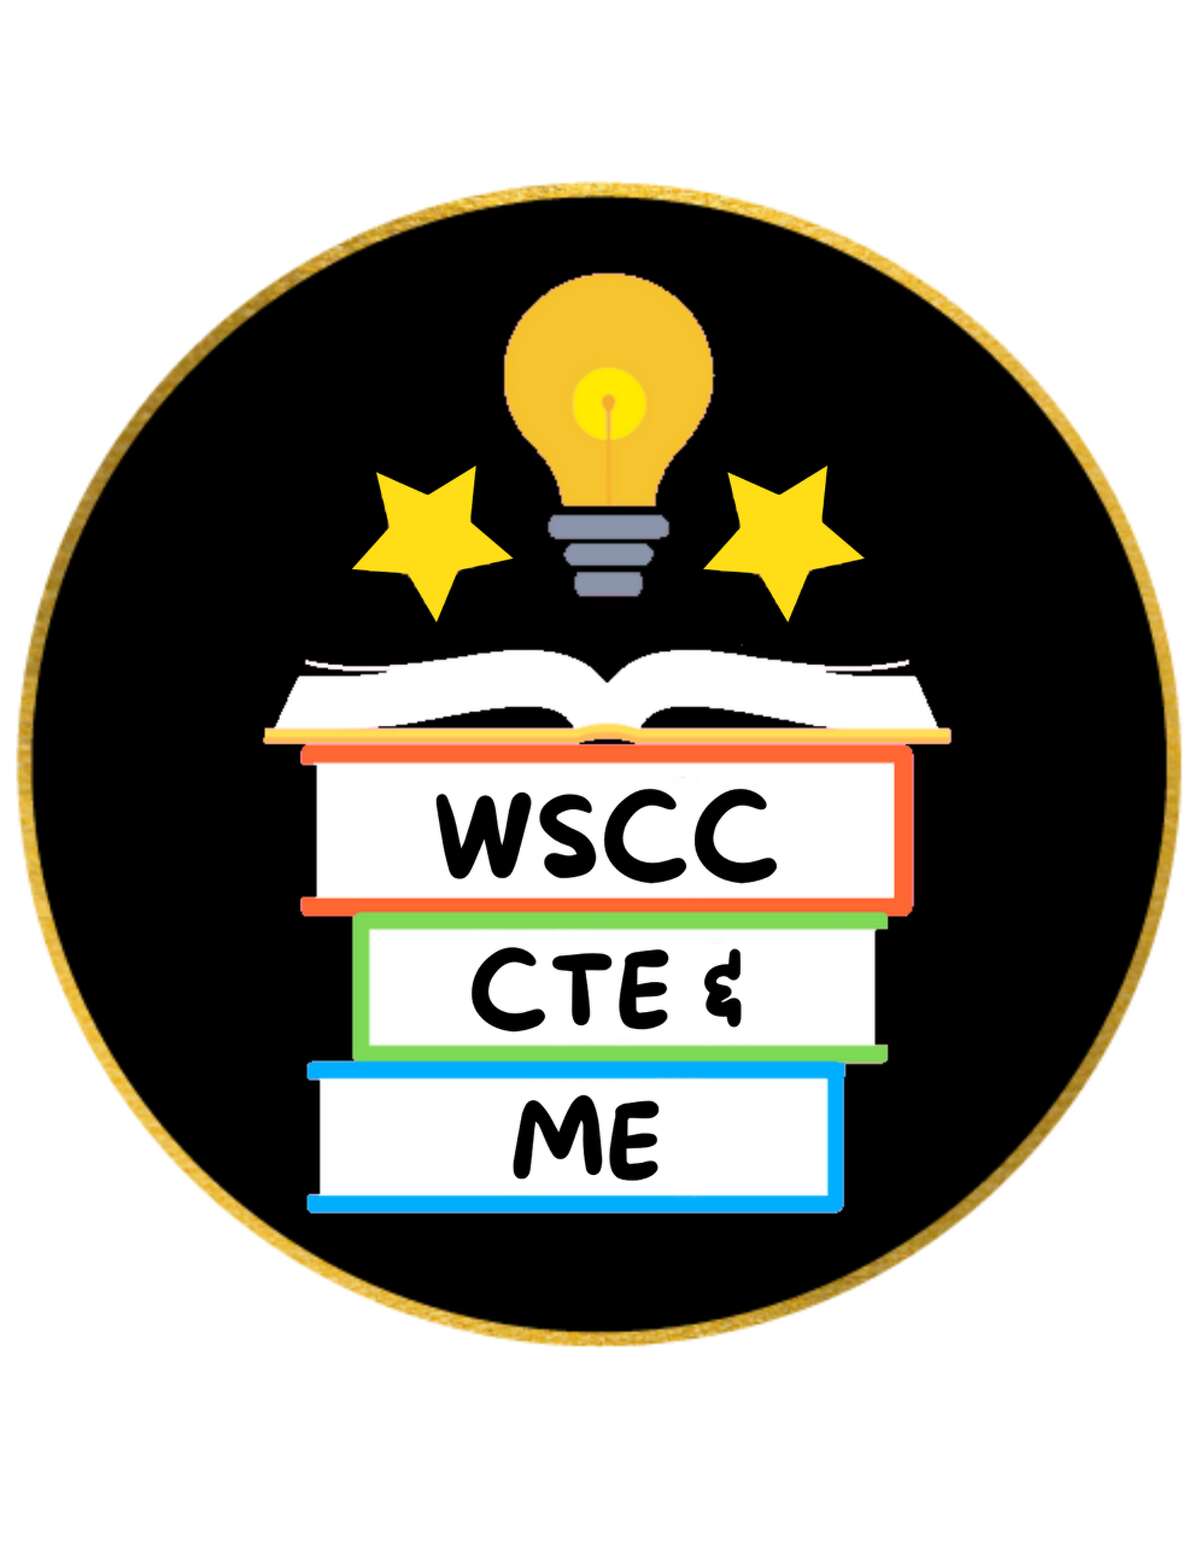 West Shore Community College is hosting its annual CTE and ME Day on May 24-25. Students from Lake, Mason and Oceana counties are invited to attend.